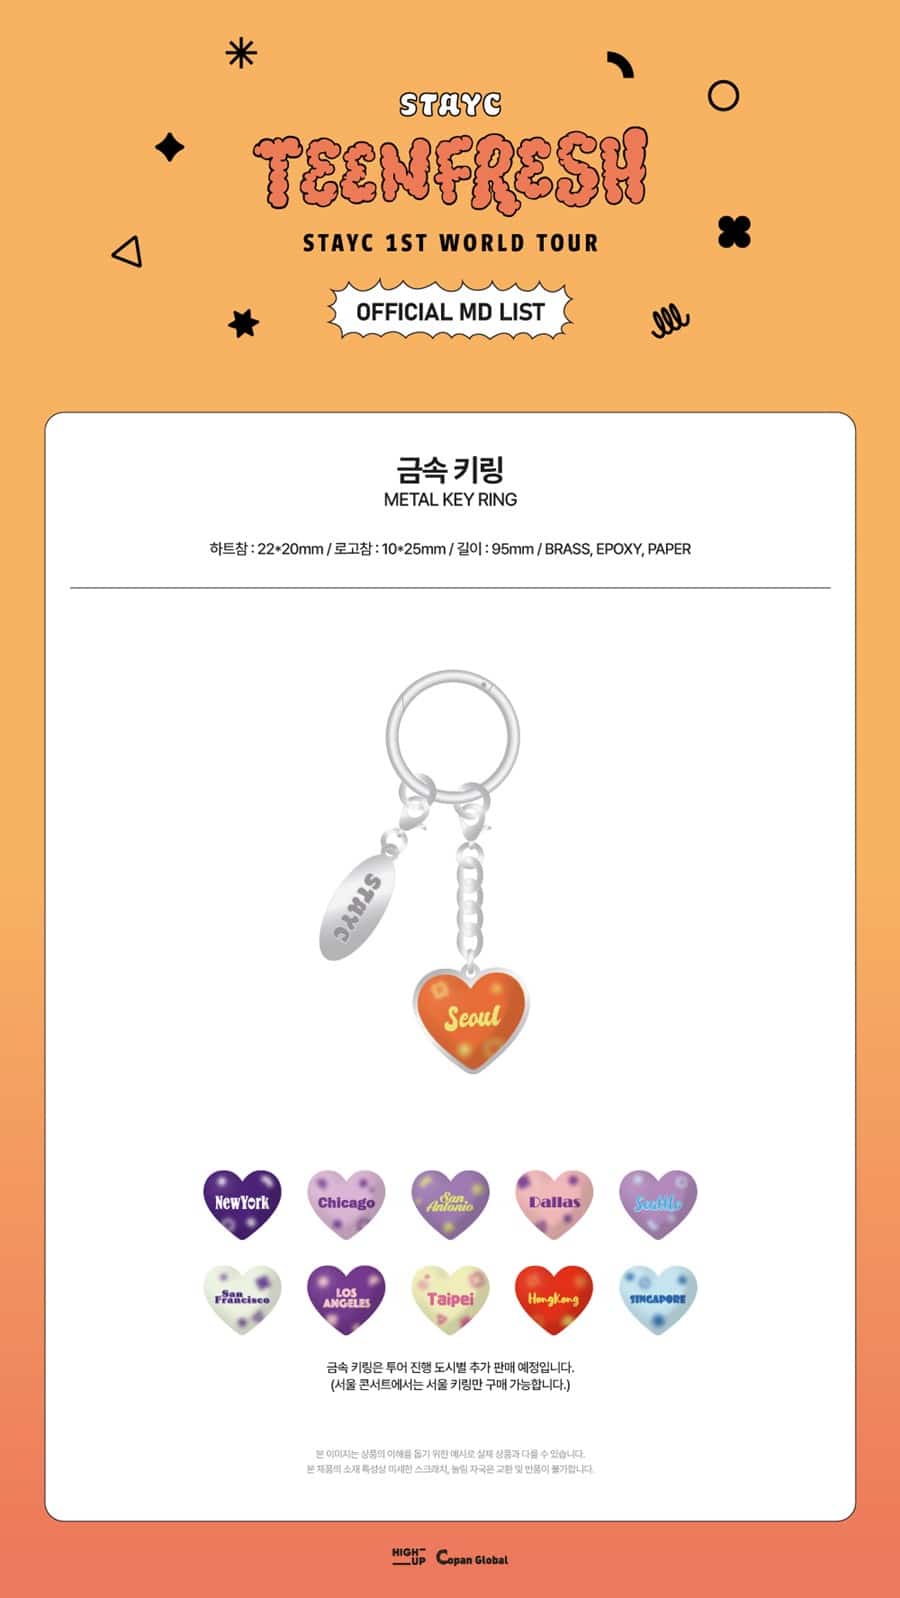 stayc-09-metal-keyring-stayc-1st-world-tour-teenfresh-official-md-wholesales